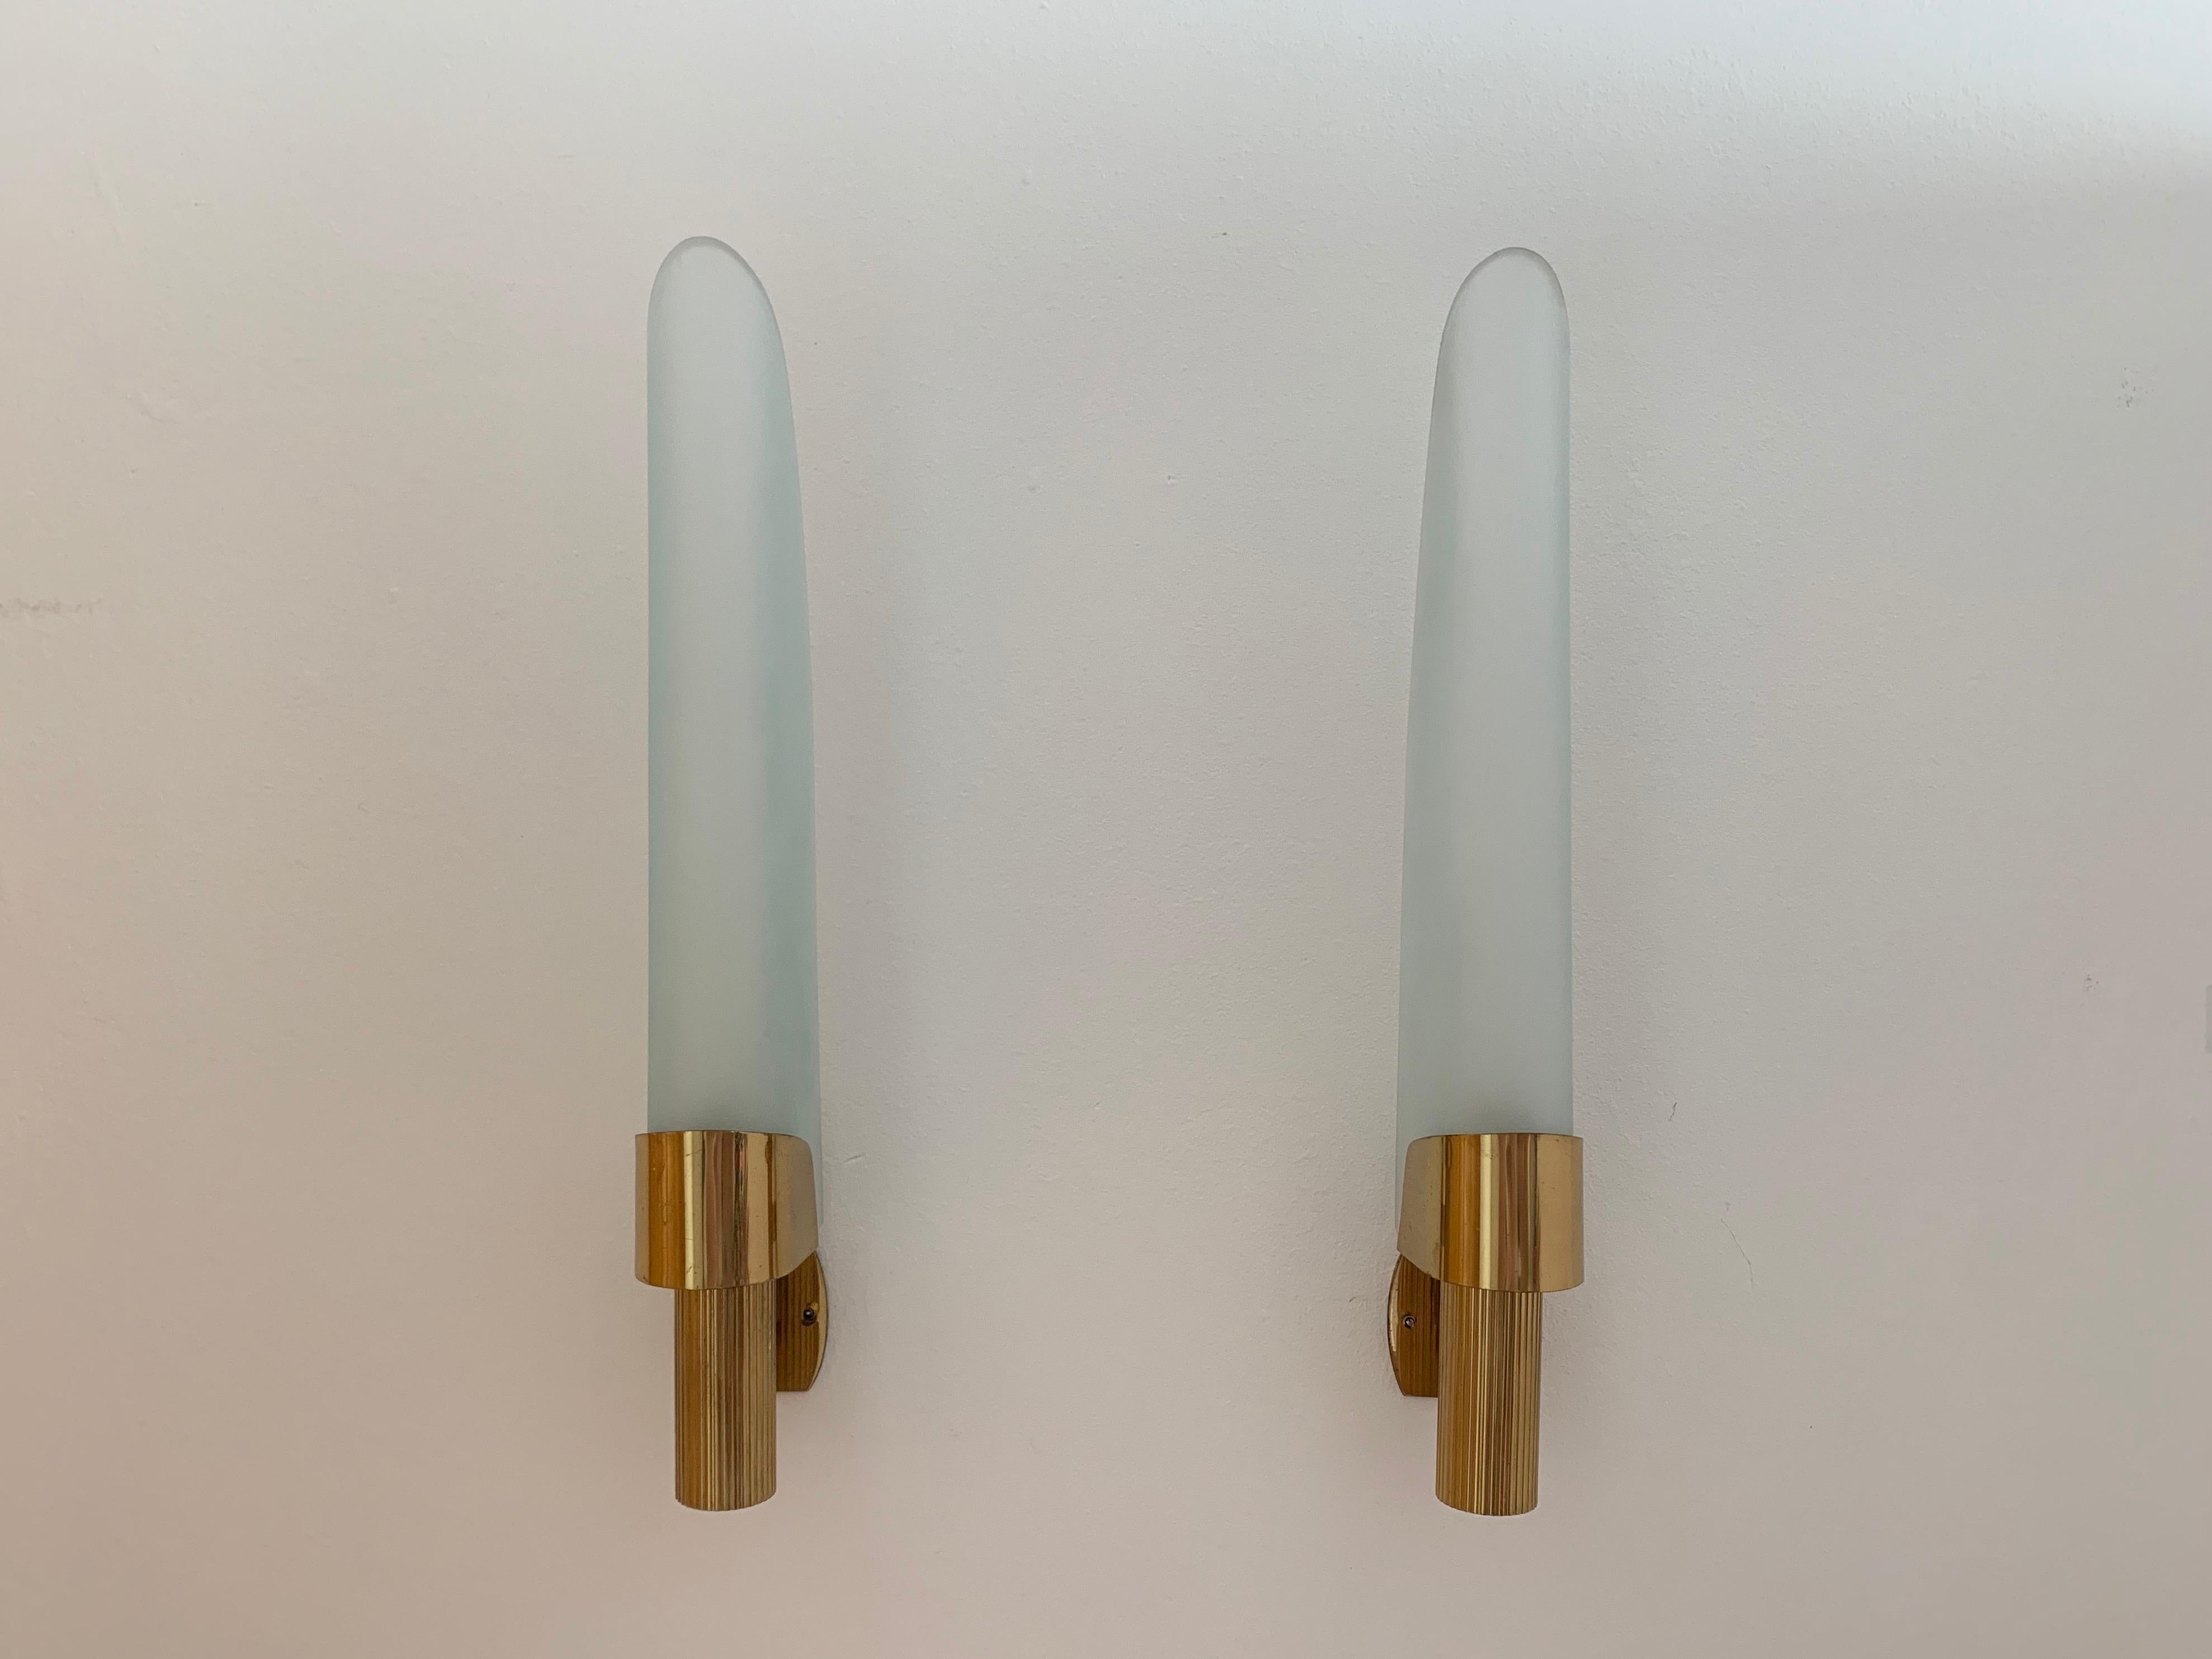 A set of 1960s sconces composer of aged golden brass ribbed fixtures holding large slightly frosted glass sheaths. Newly rewired. Fontana Arte Italy, 1960.